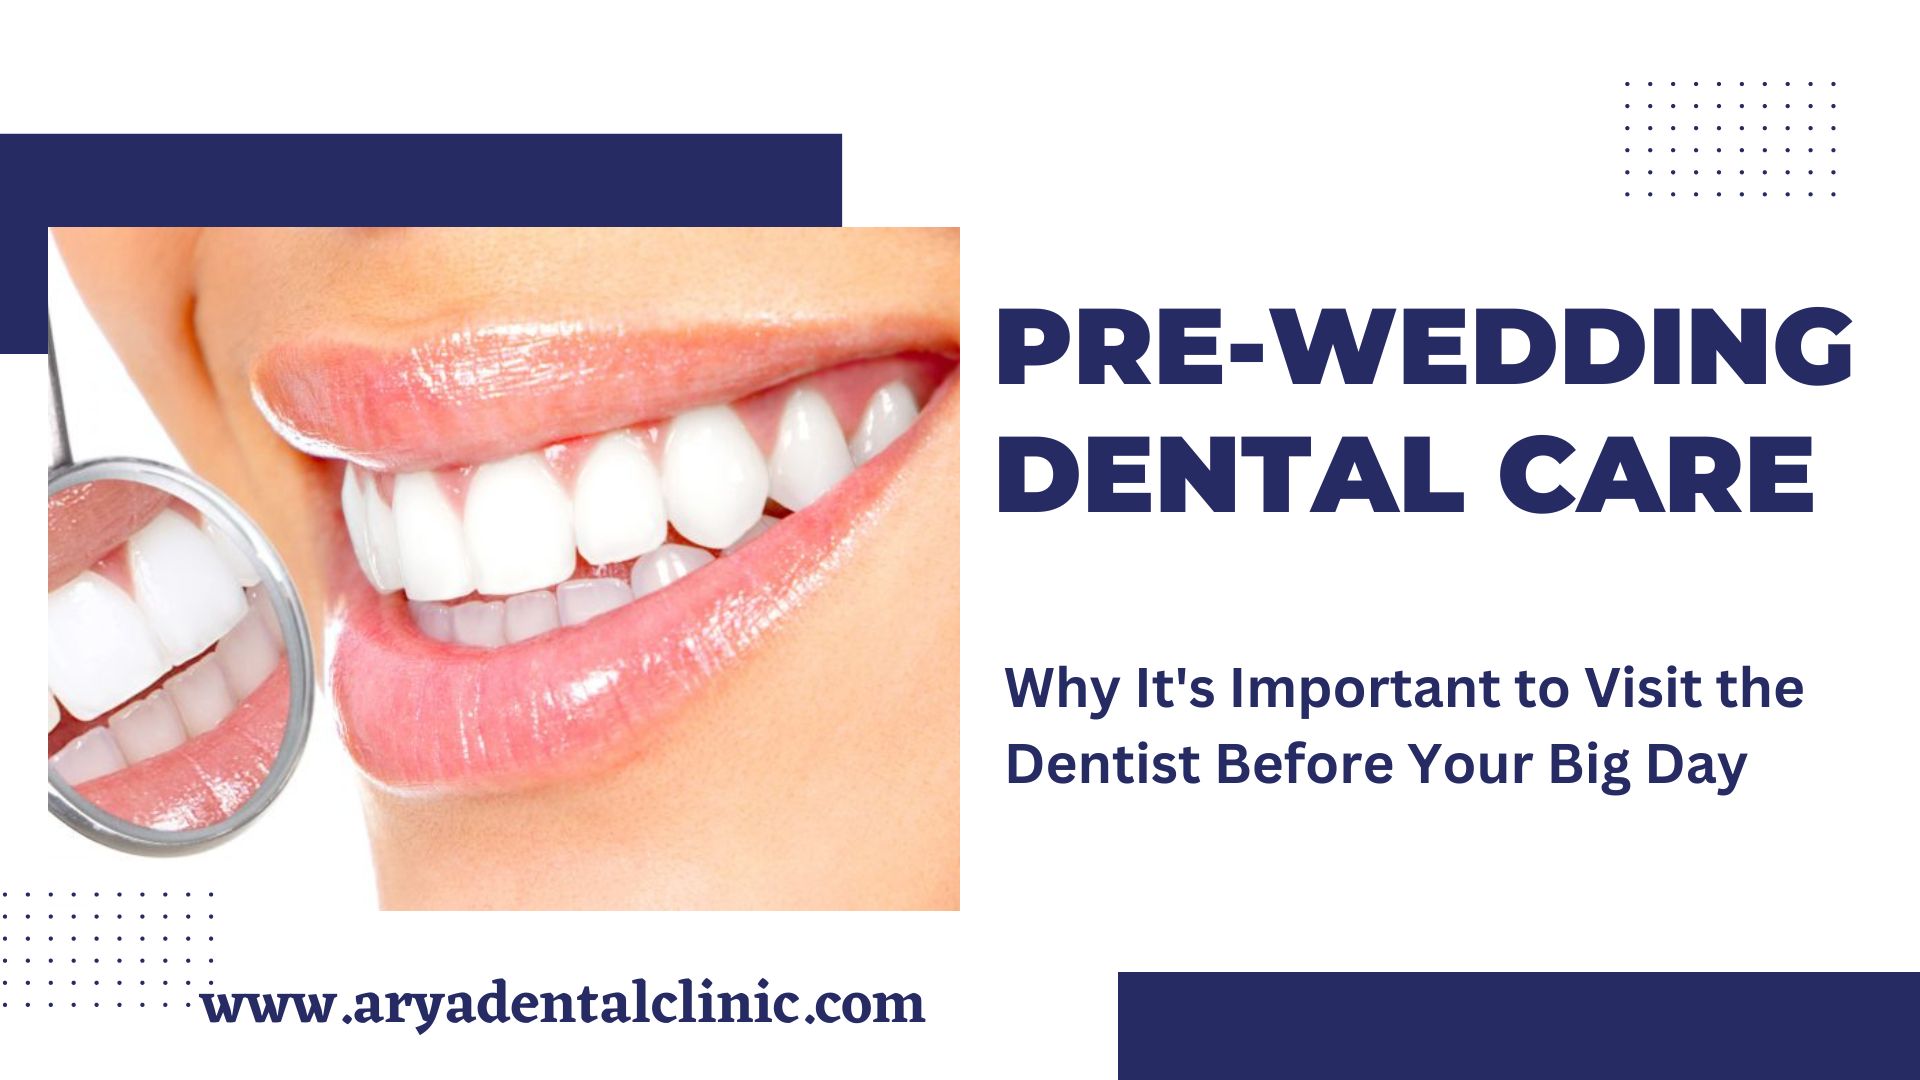 You are currently viewing “Pre-Wedding Dental Care: Why It’s Important to Visit the Dentist Before Your Big Day”